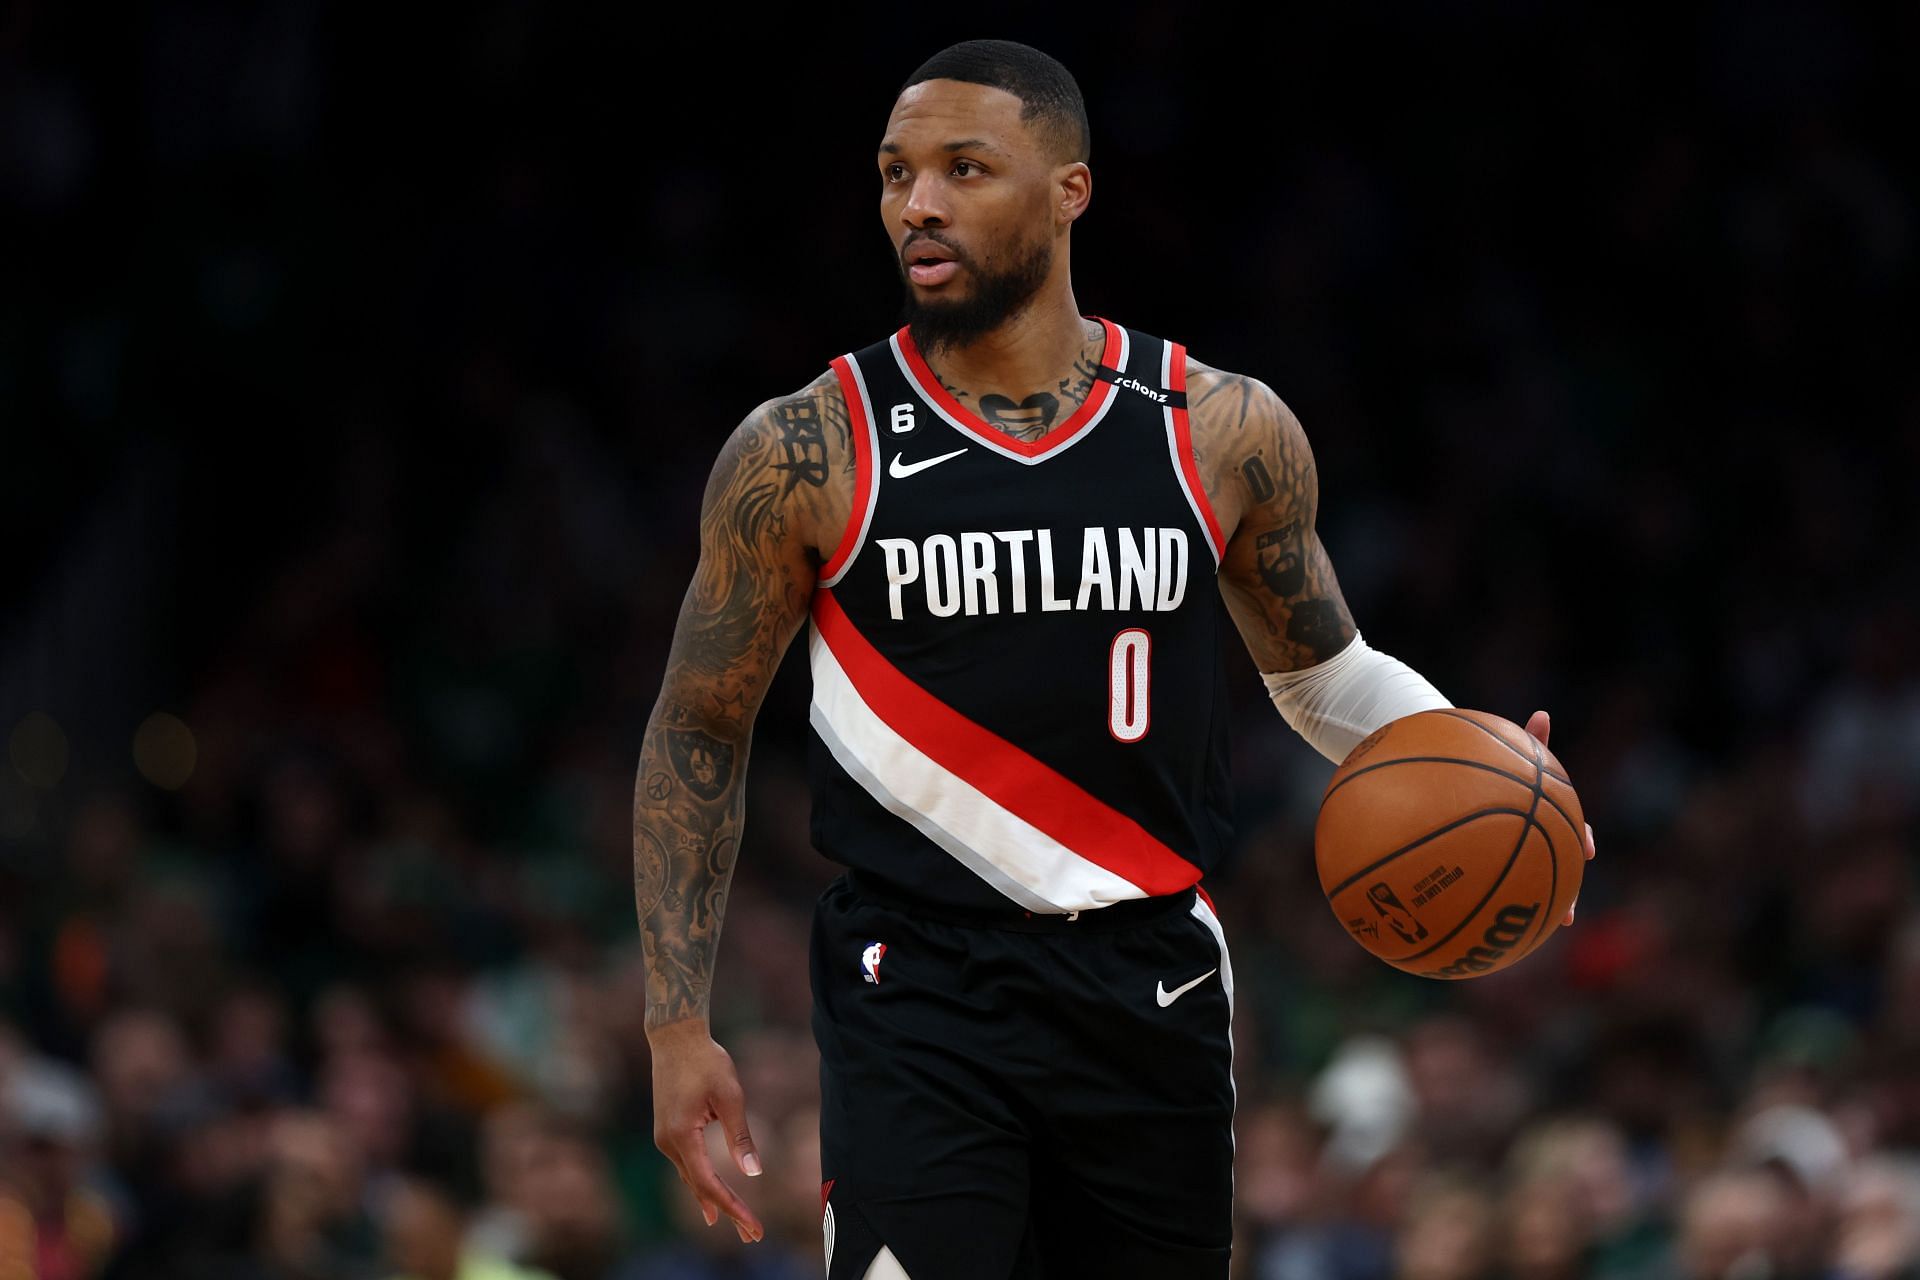 Damian Lillard has made his intention of a move clear, and it might not be Miami striking a deal for him